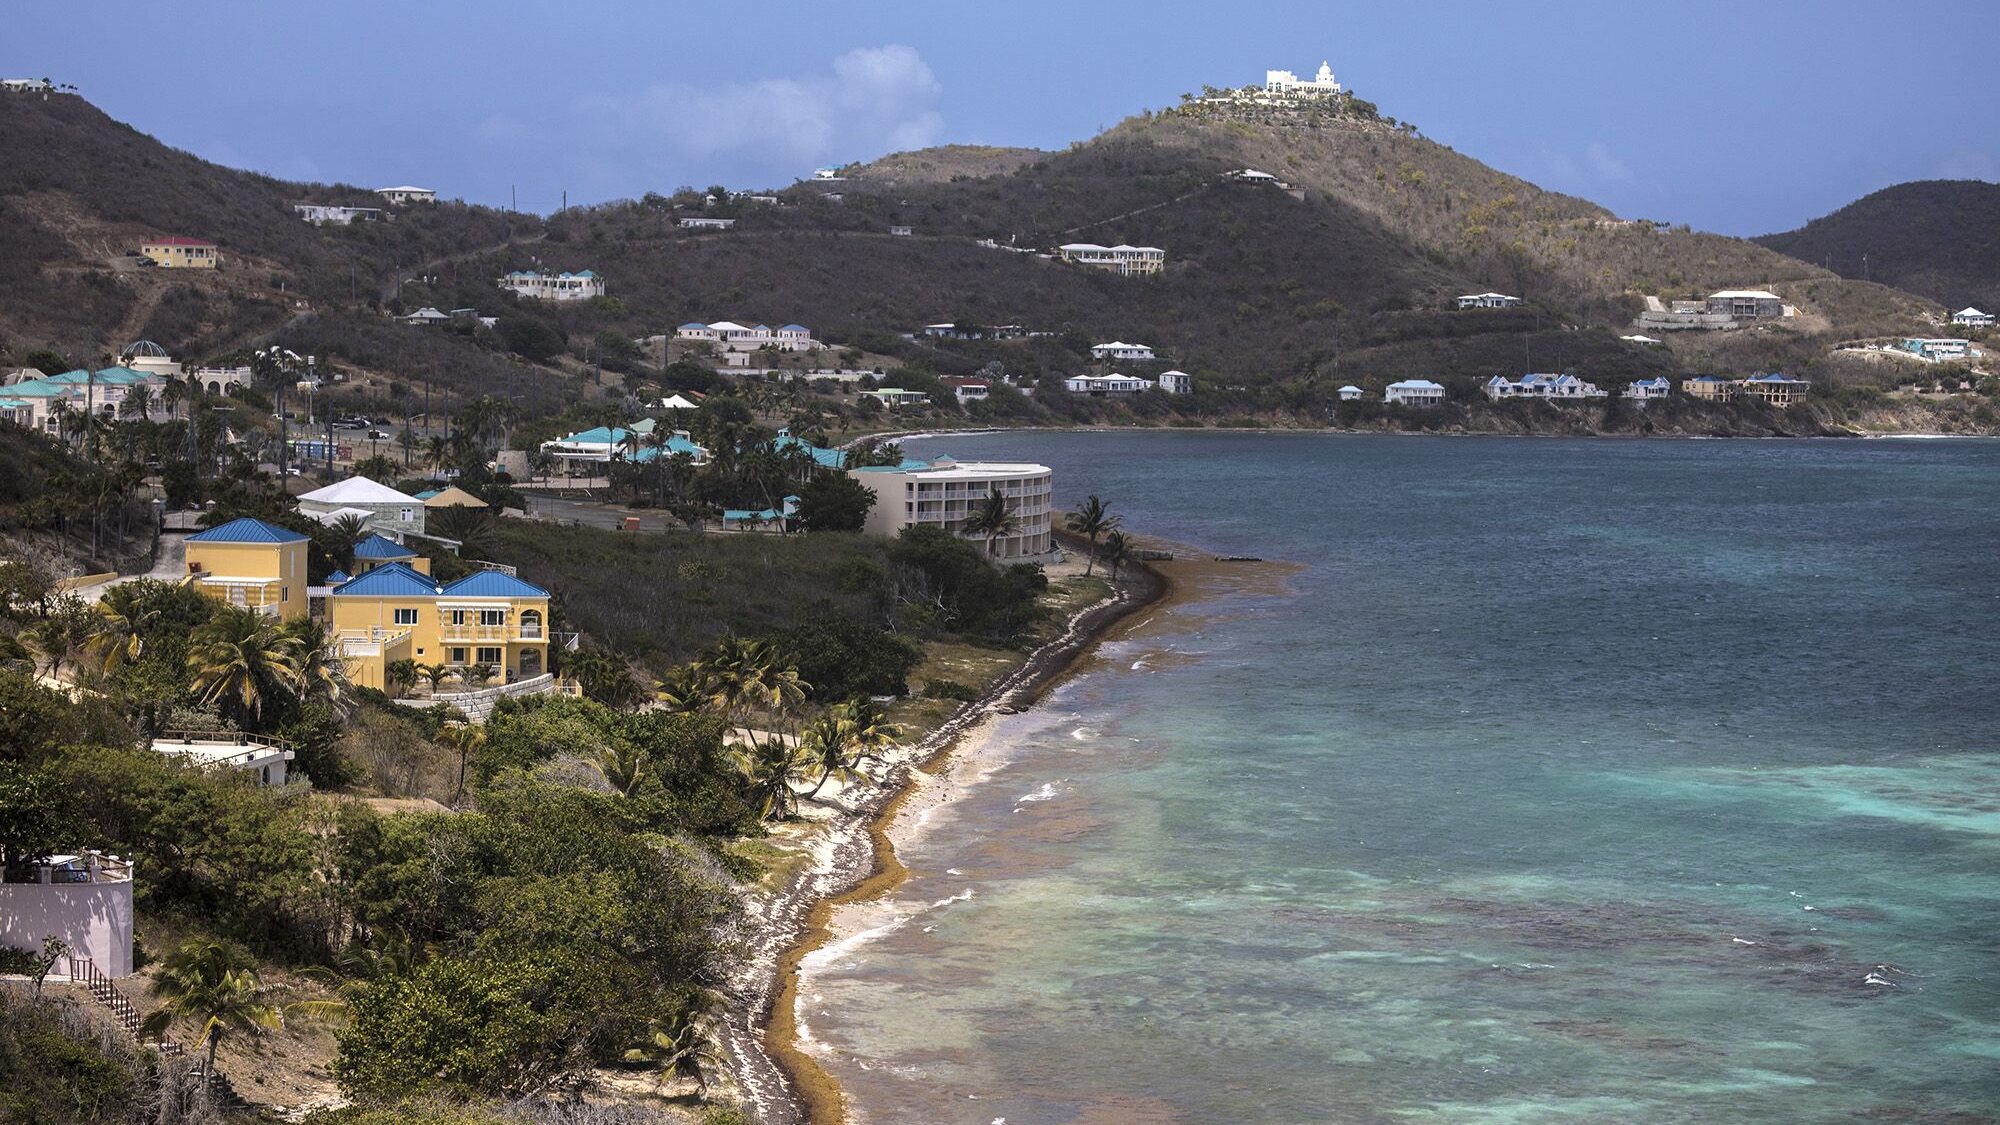 Cane Bay beach in Saint Croix in 2021. Scientists used samples from sclerosponges in this region to...